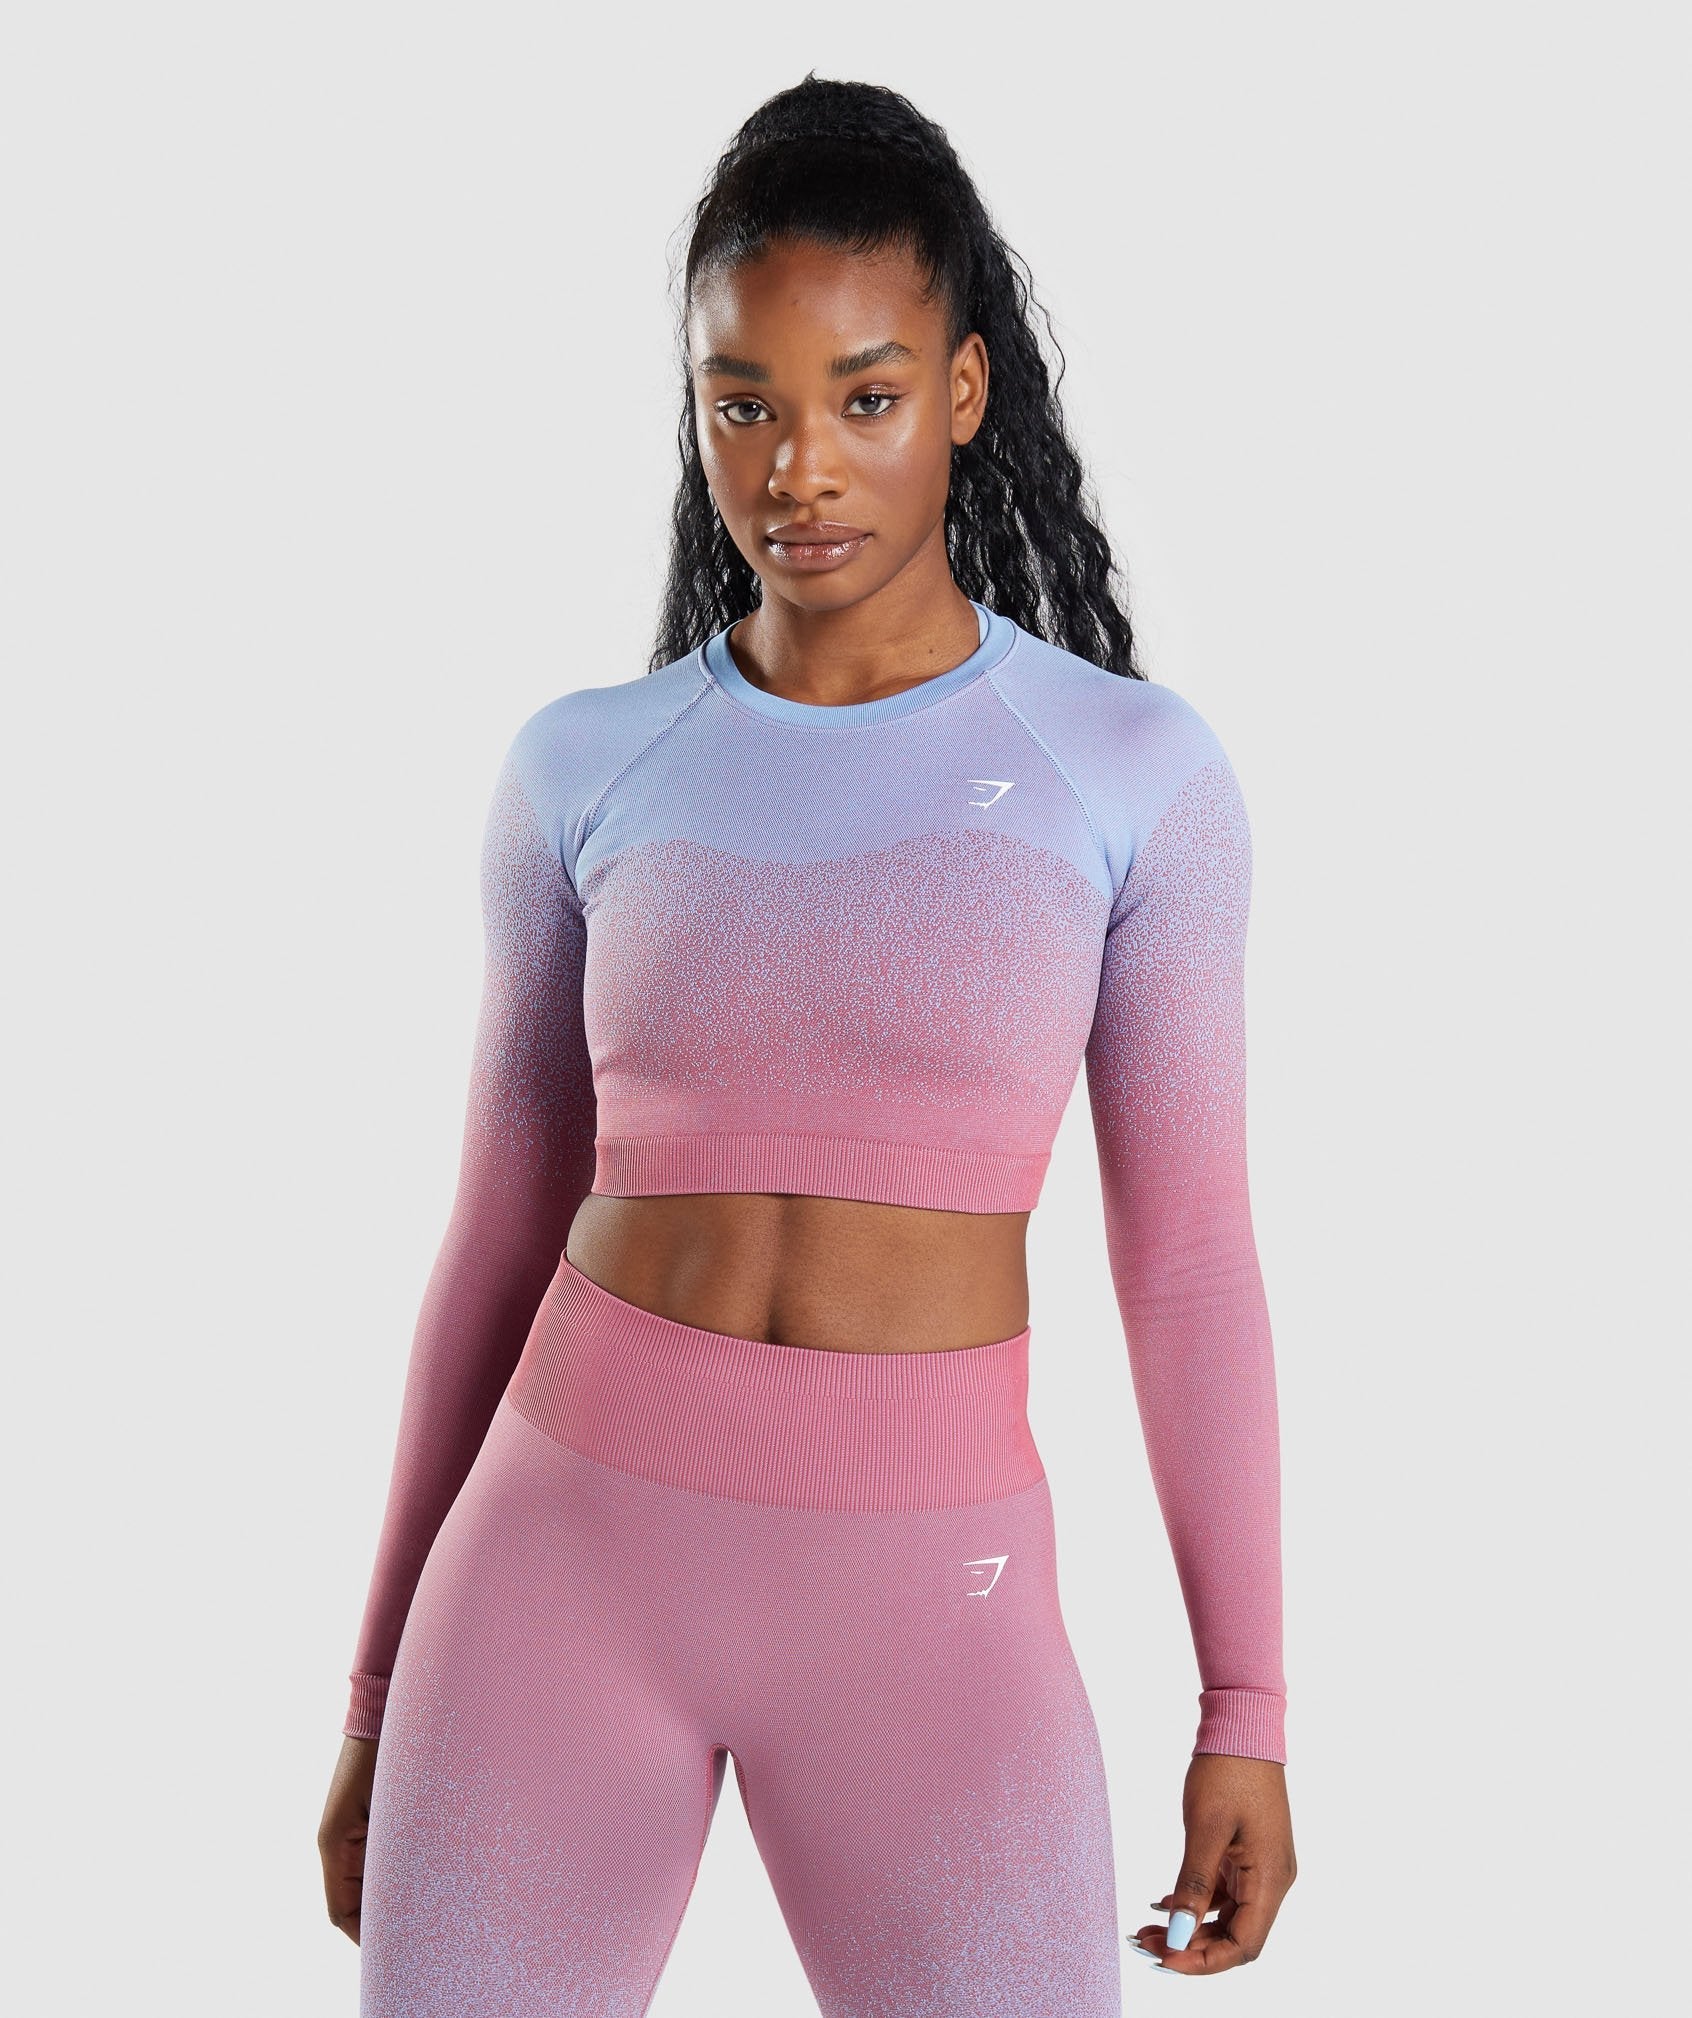 Adapt Ombre Seamless Yoga Outfits Set Women Sport Suit Workout